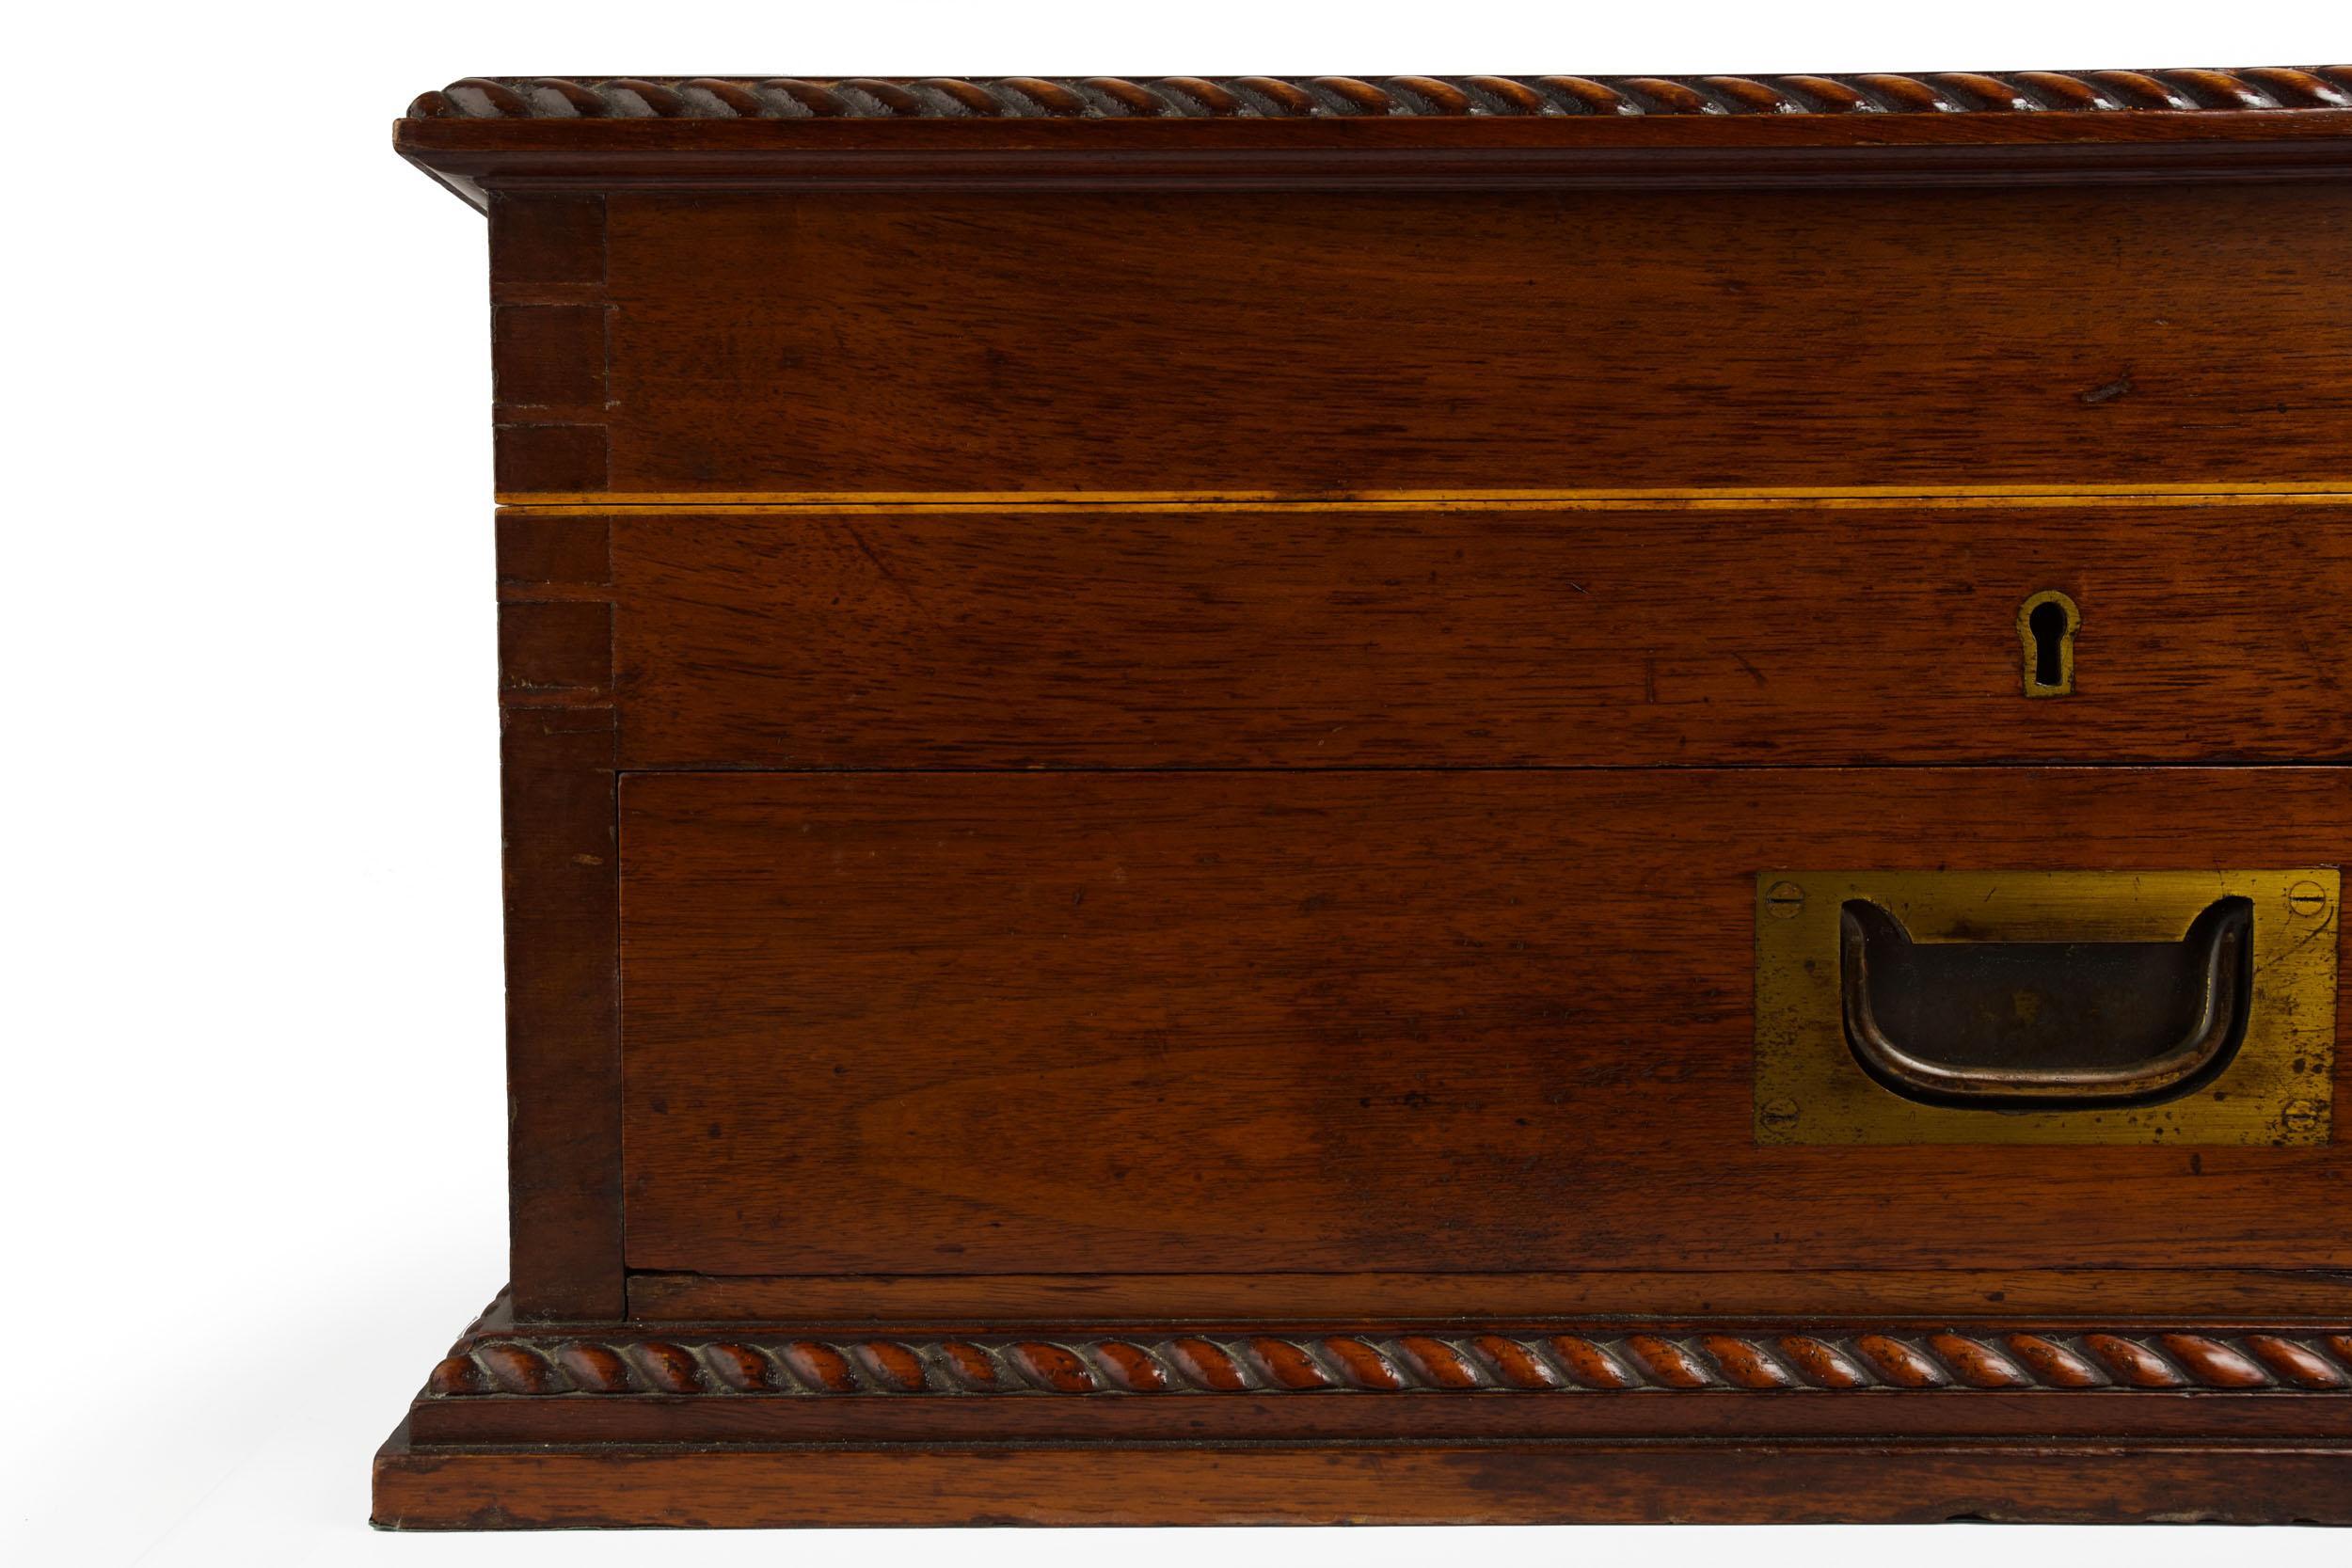 Finely Made English Dovetailed Walnut Cutlery Box by Walker & Hall 1